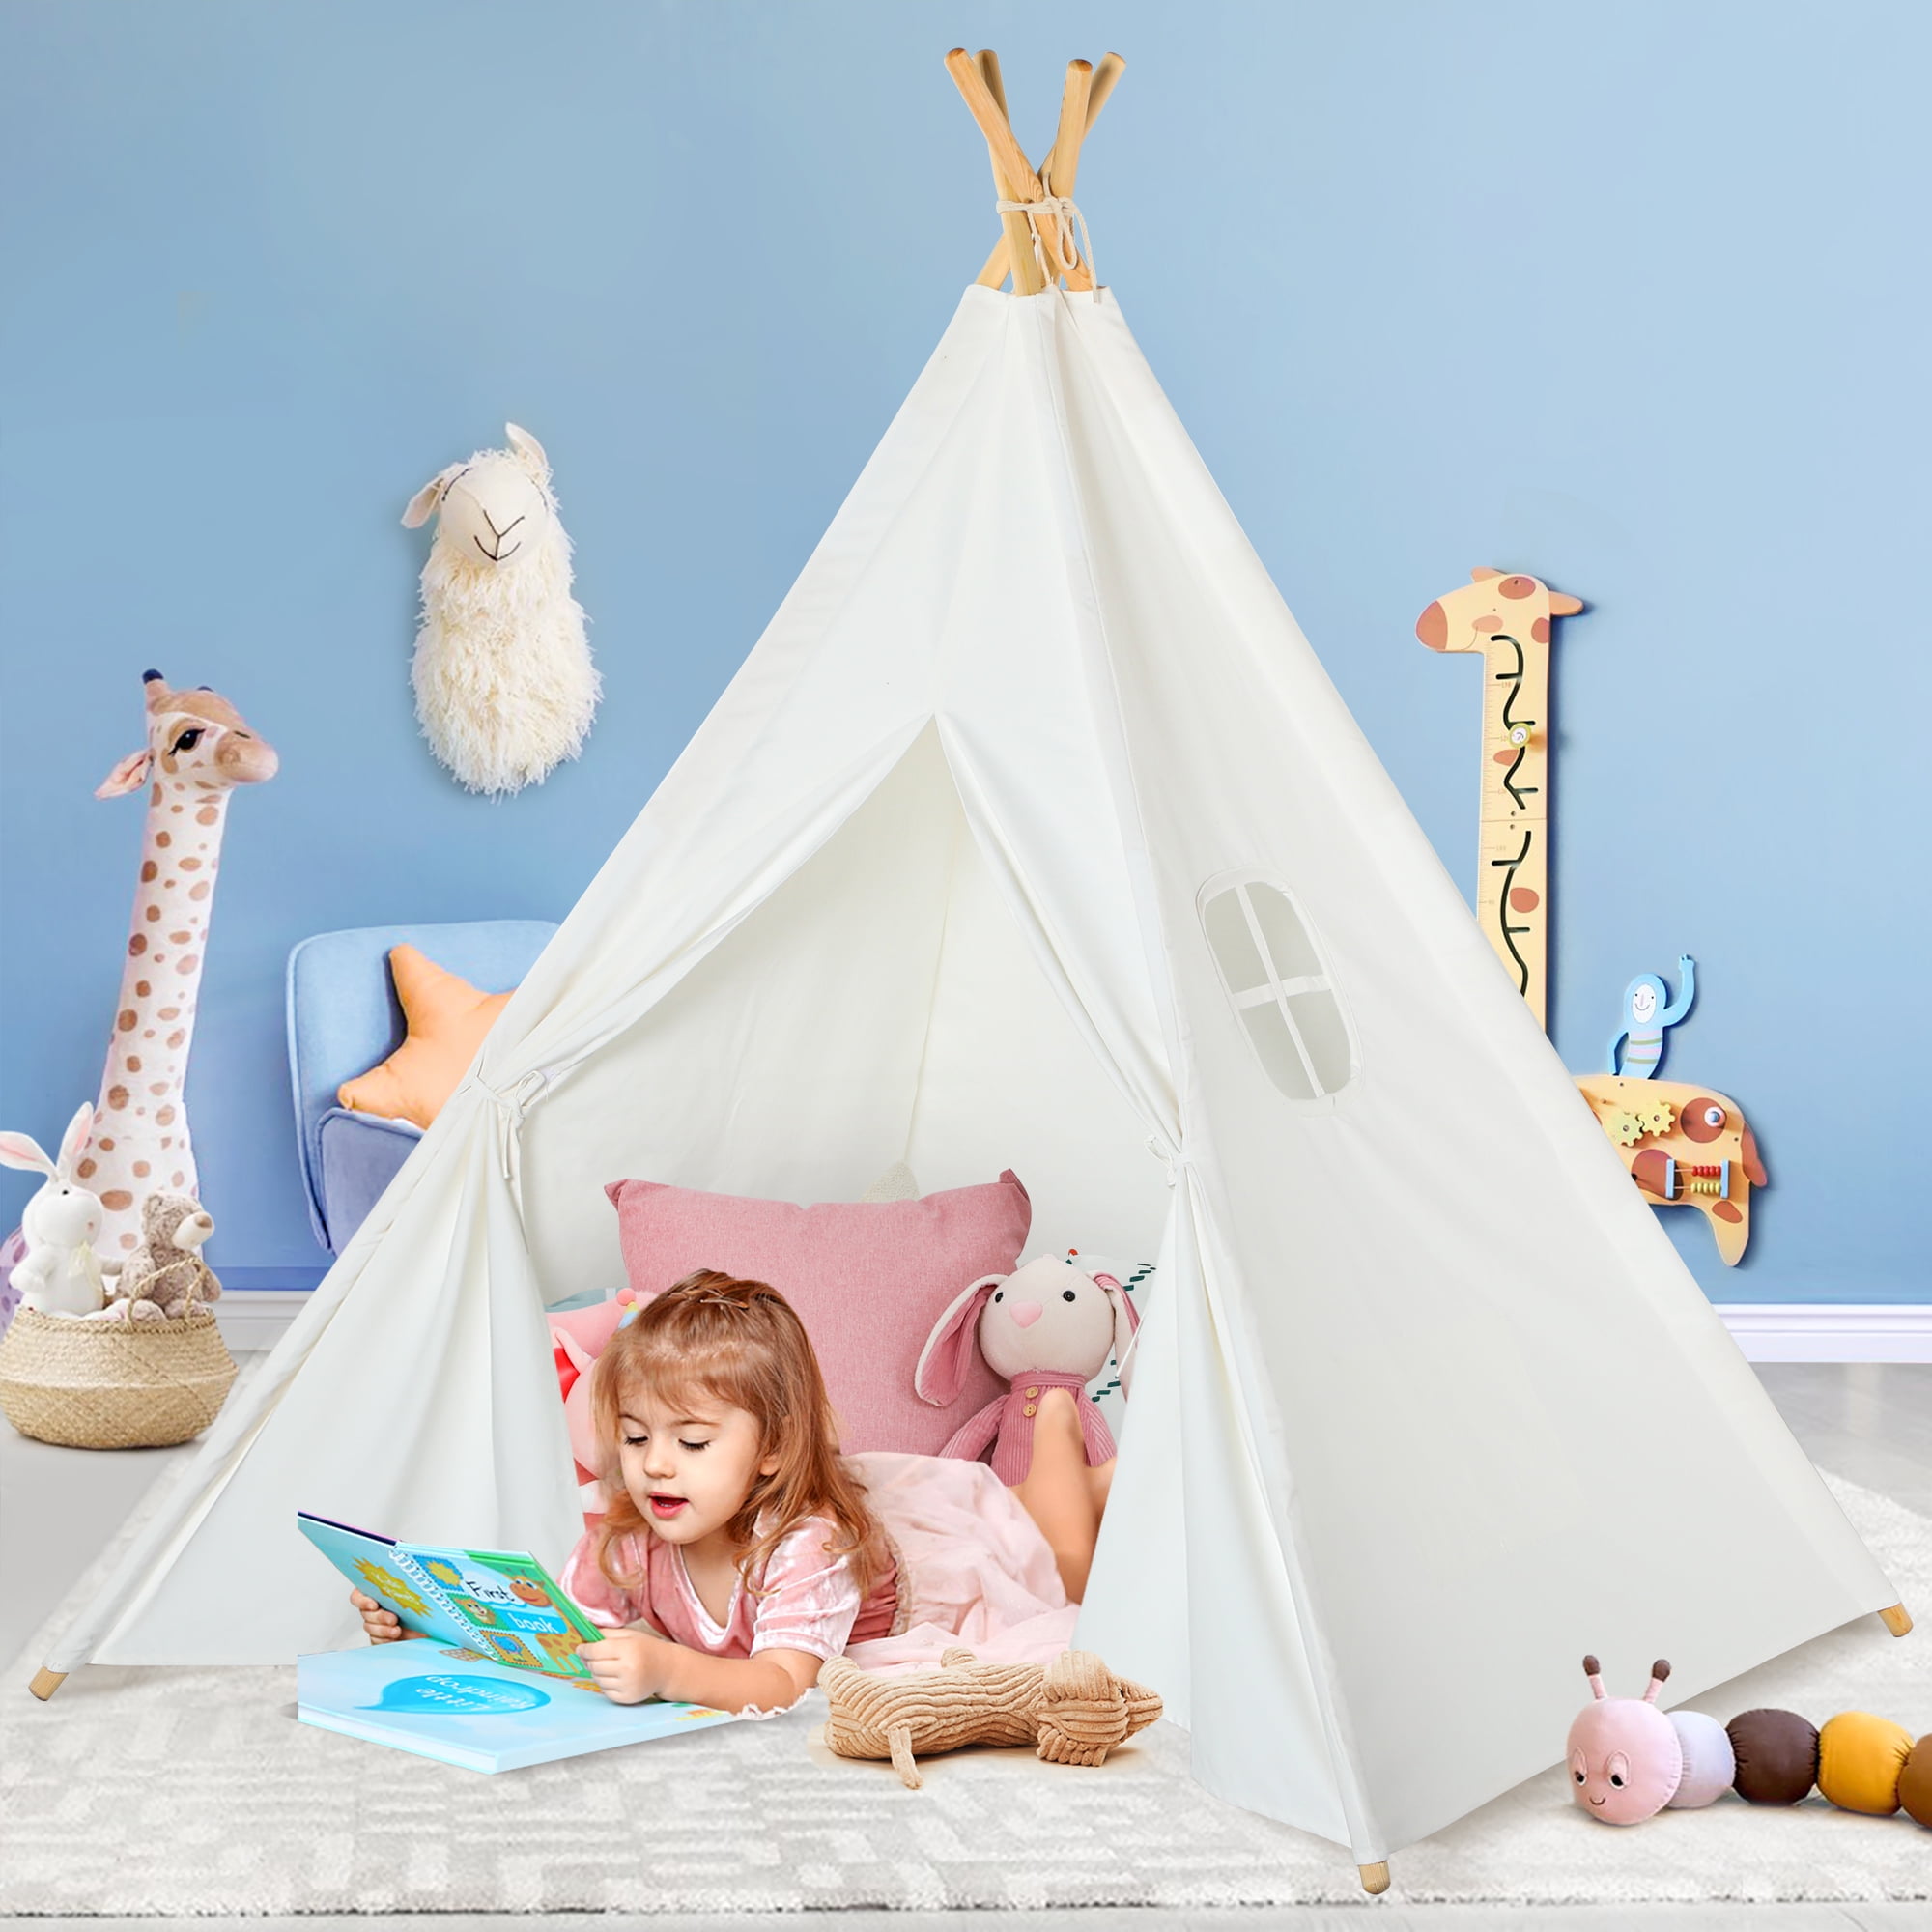 Children's teepee,kids Christmas gifts,kids tipi,Toys,kids gifts,kids tents 